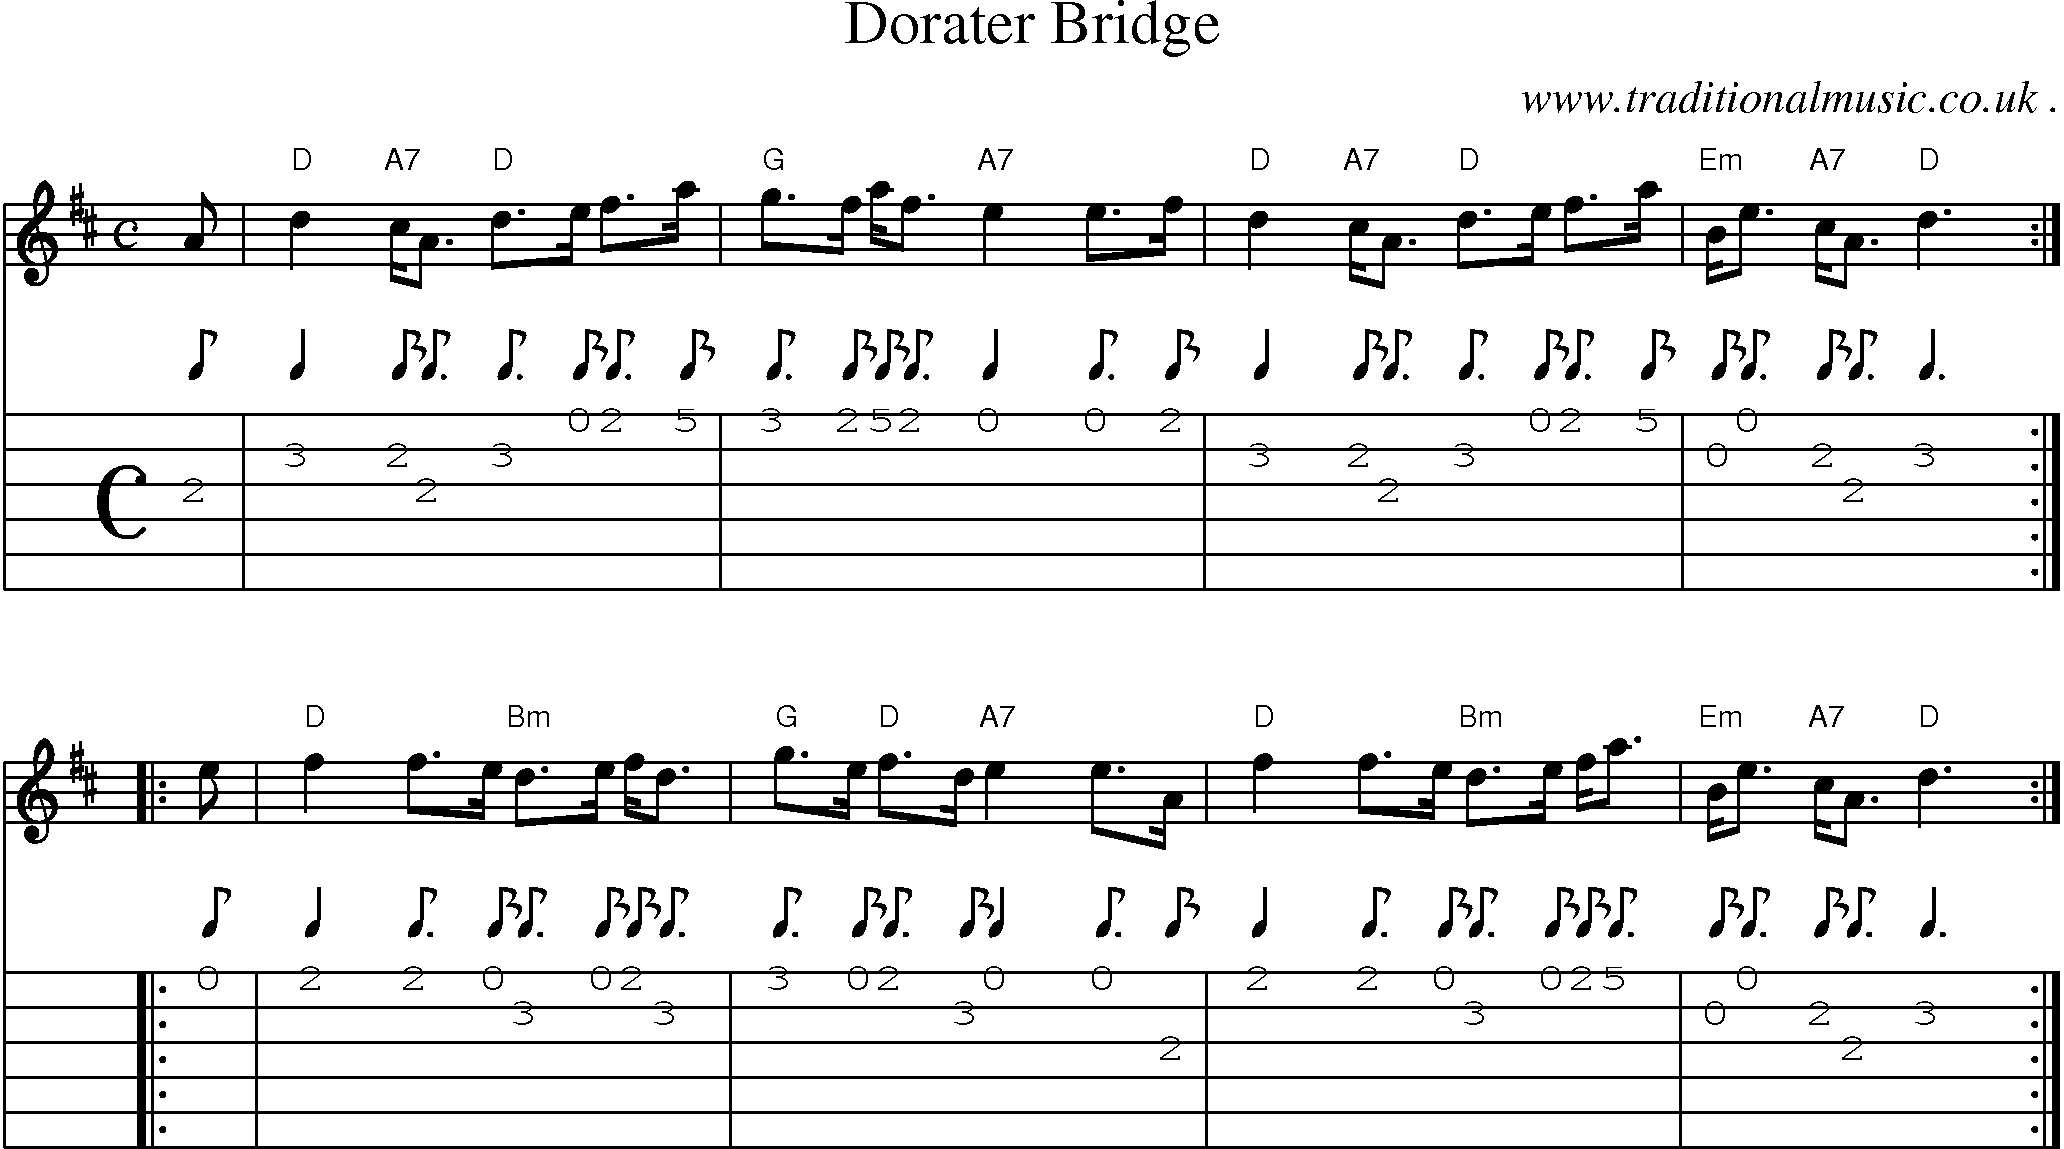 Sheet-music  score, Chords and Guitar Tabs for Dorater Bridge